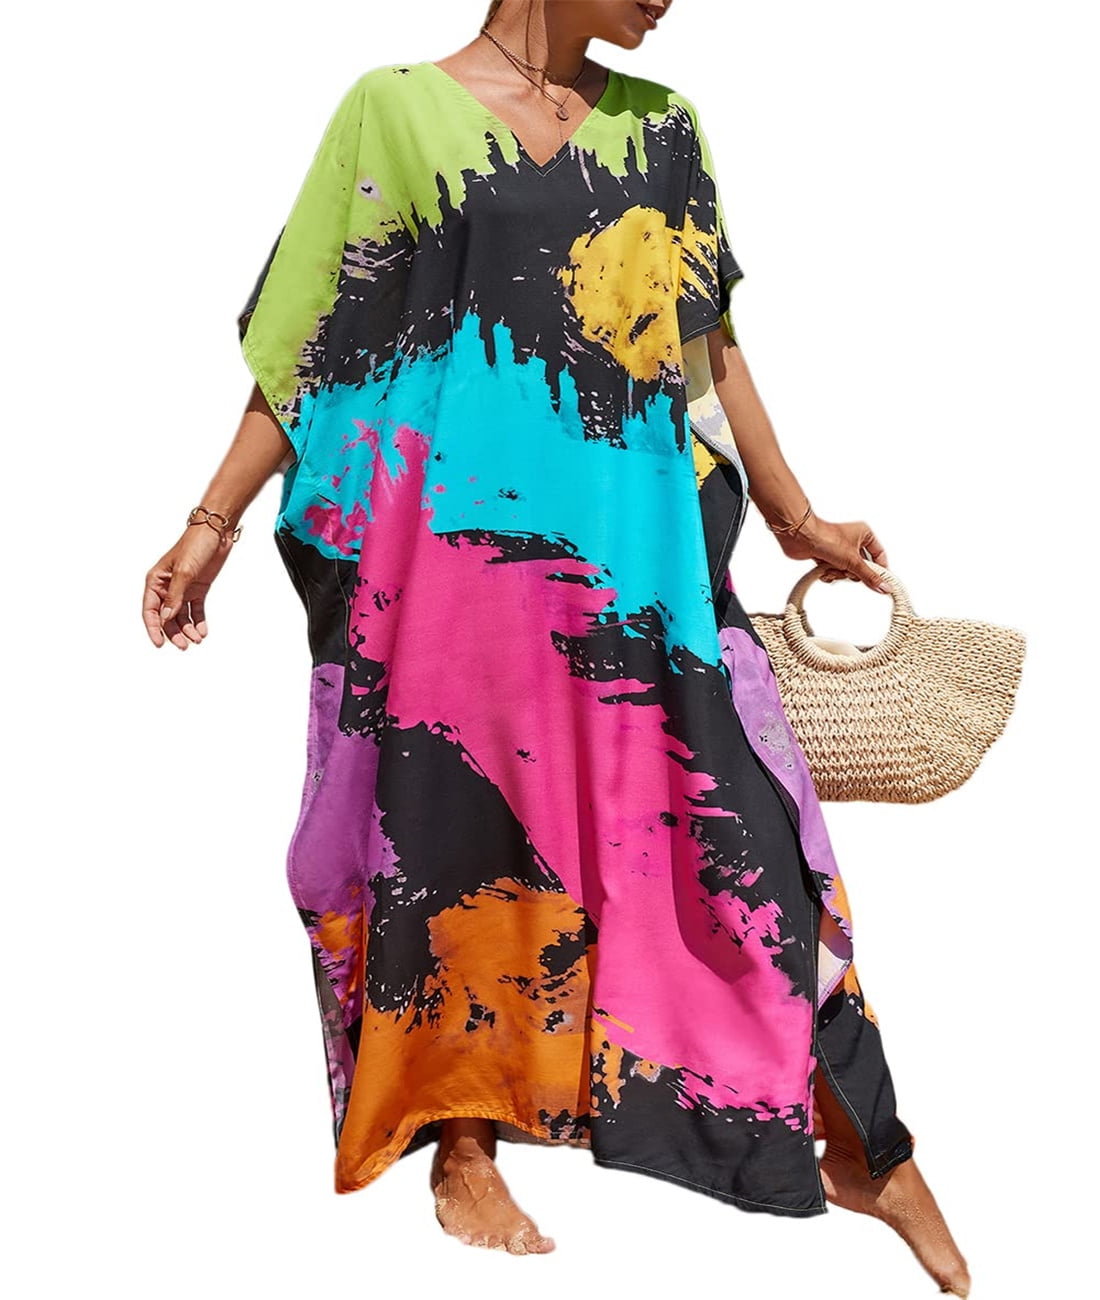 Bsubseach Bathing Suit Cover Up Colorful Caftan Beach Dress for Women ...